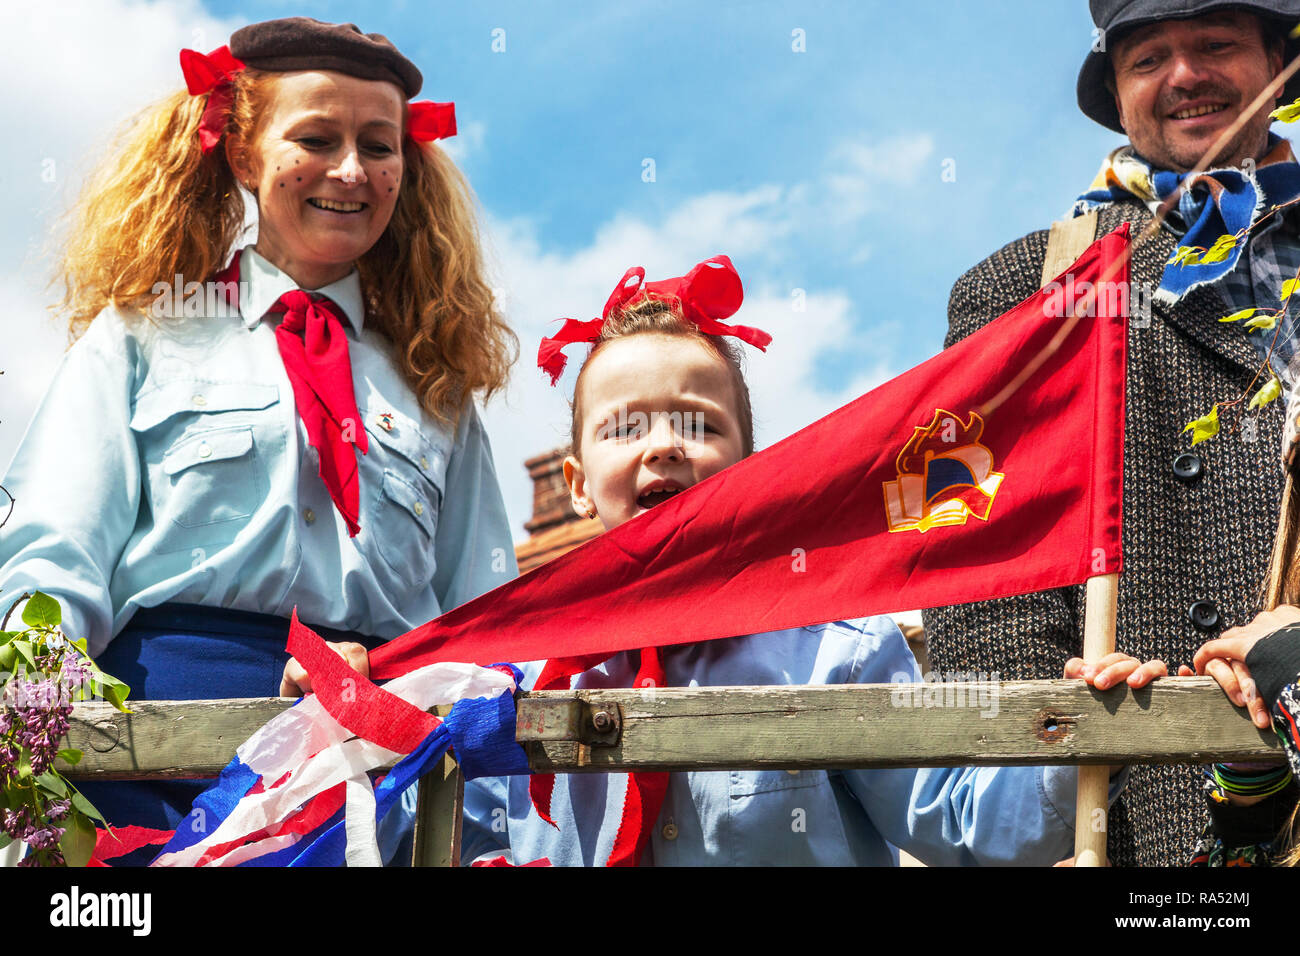 Czechoslovak pioneers, a communist period costume - red scarf, blue shirt during the Holidays of Labor Day, Kryry, Czech Republic Stock Photo